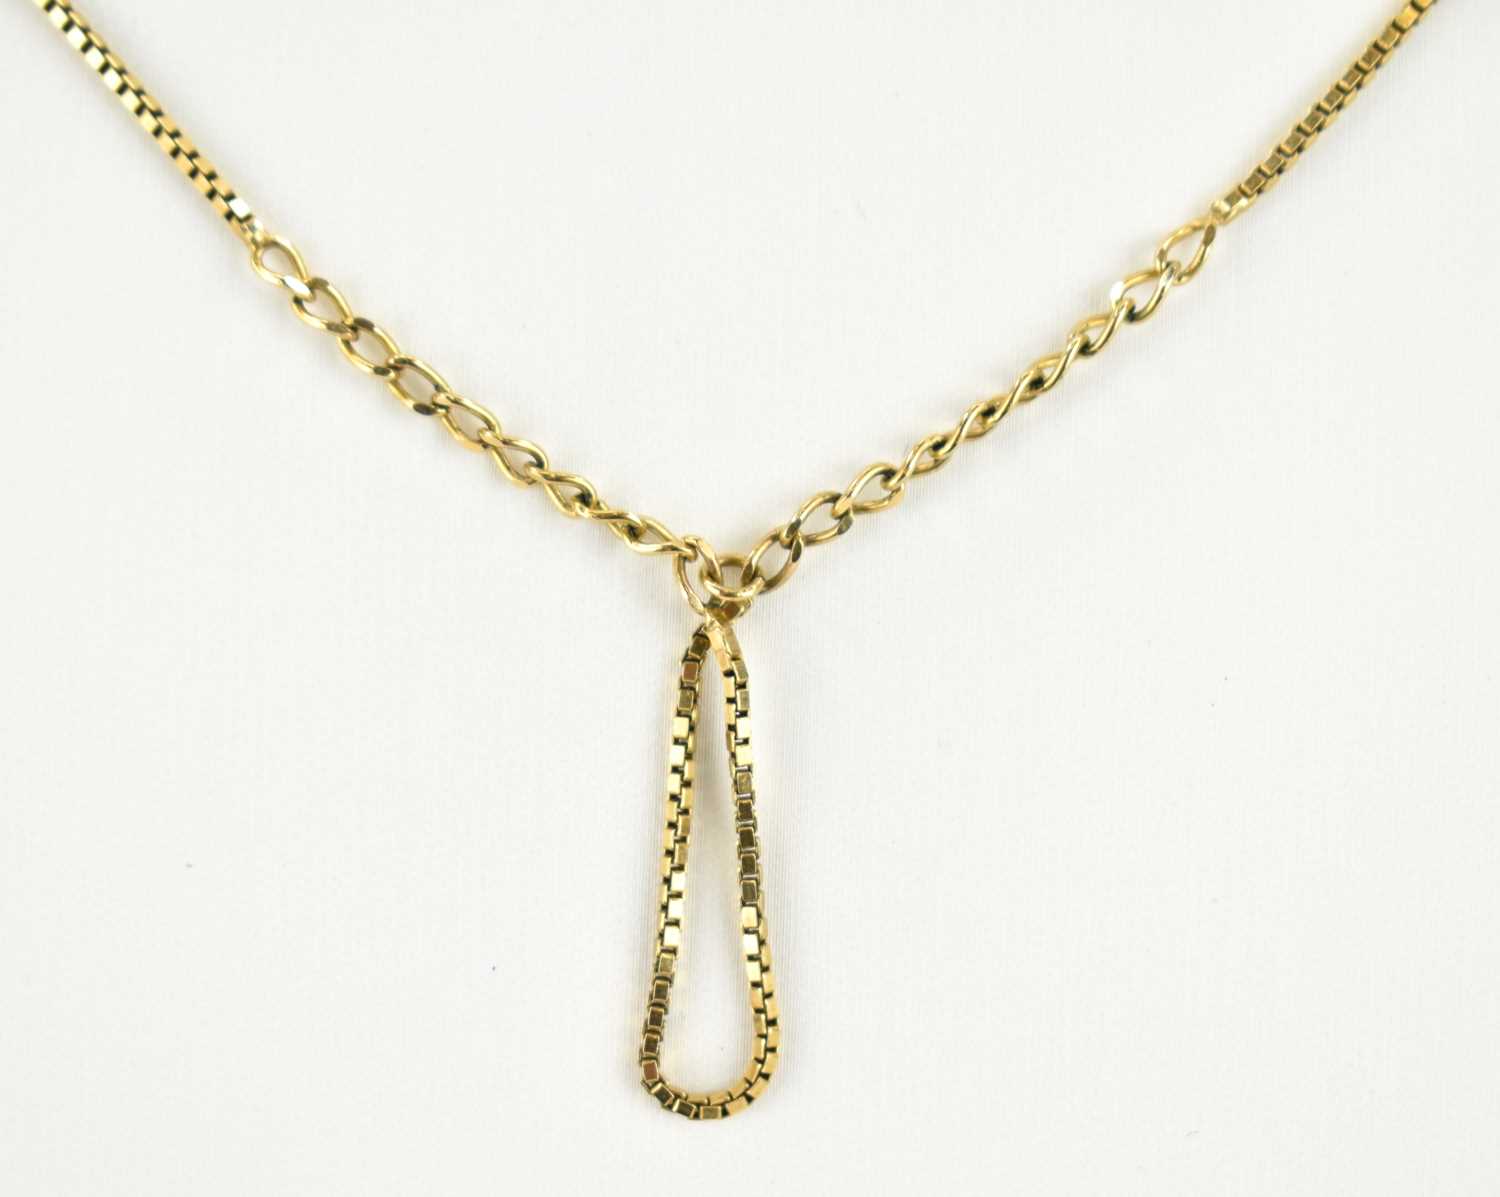 A 9ct gold box and chain link necklace with a small box link hoop pendant, with circular clasp,